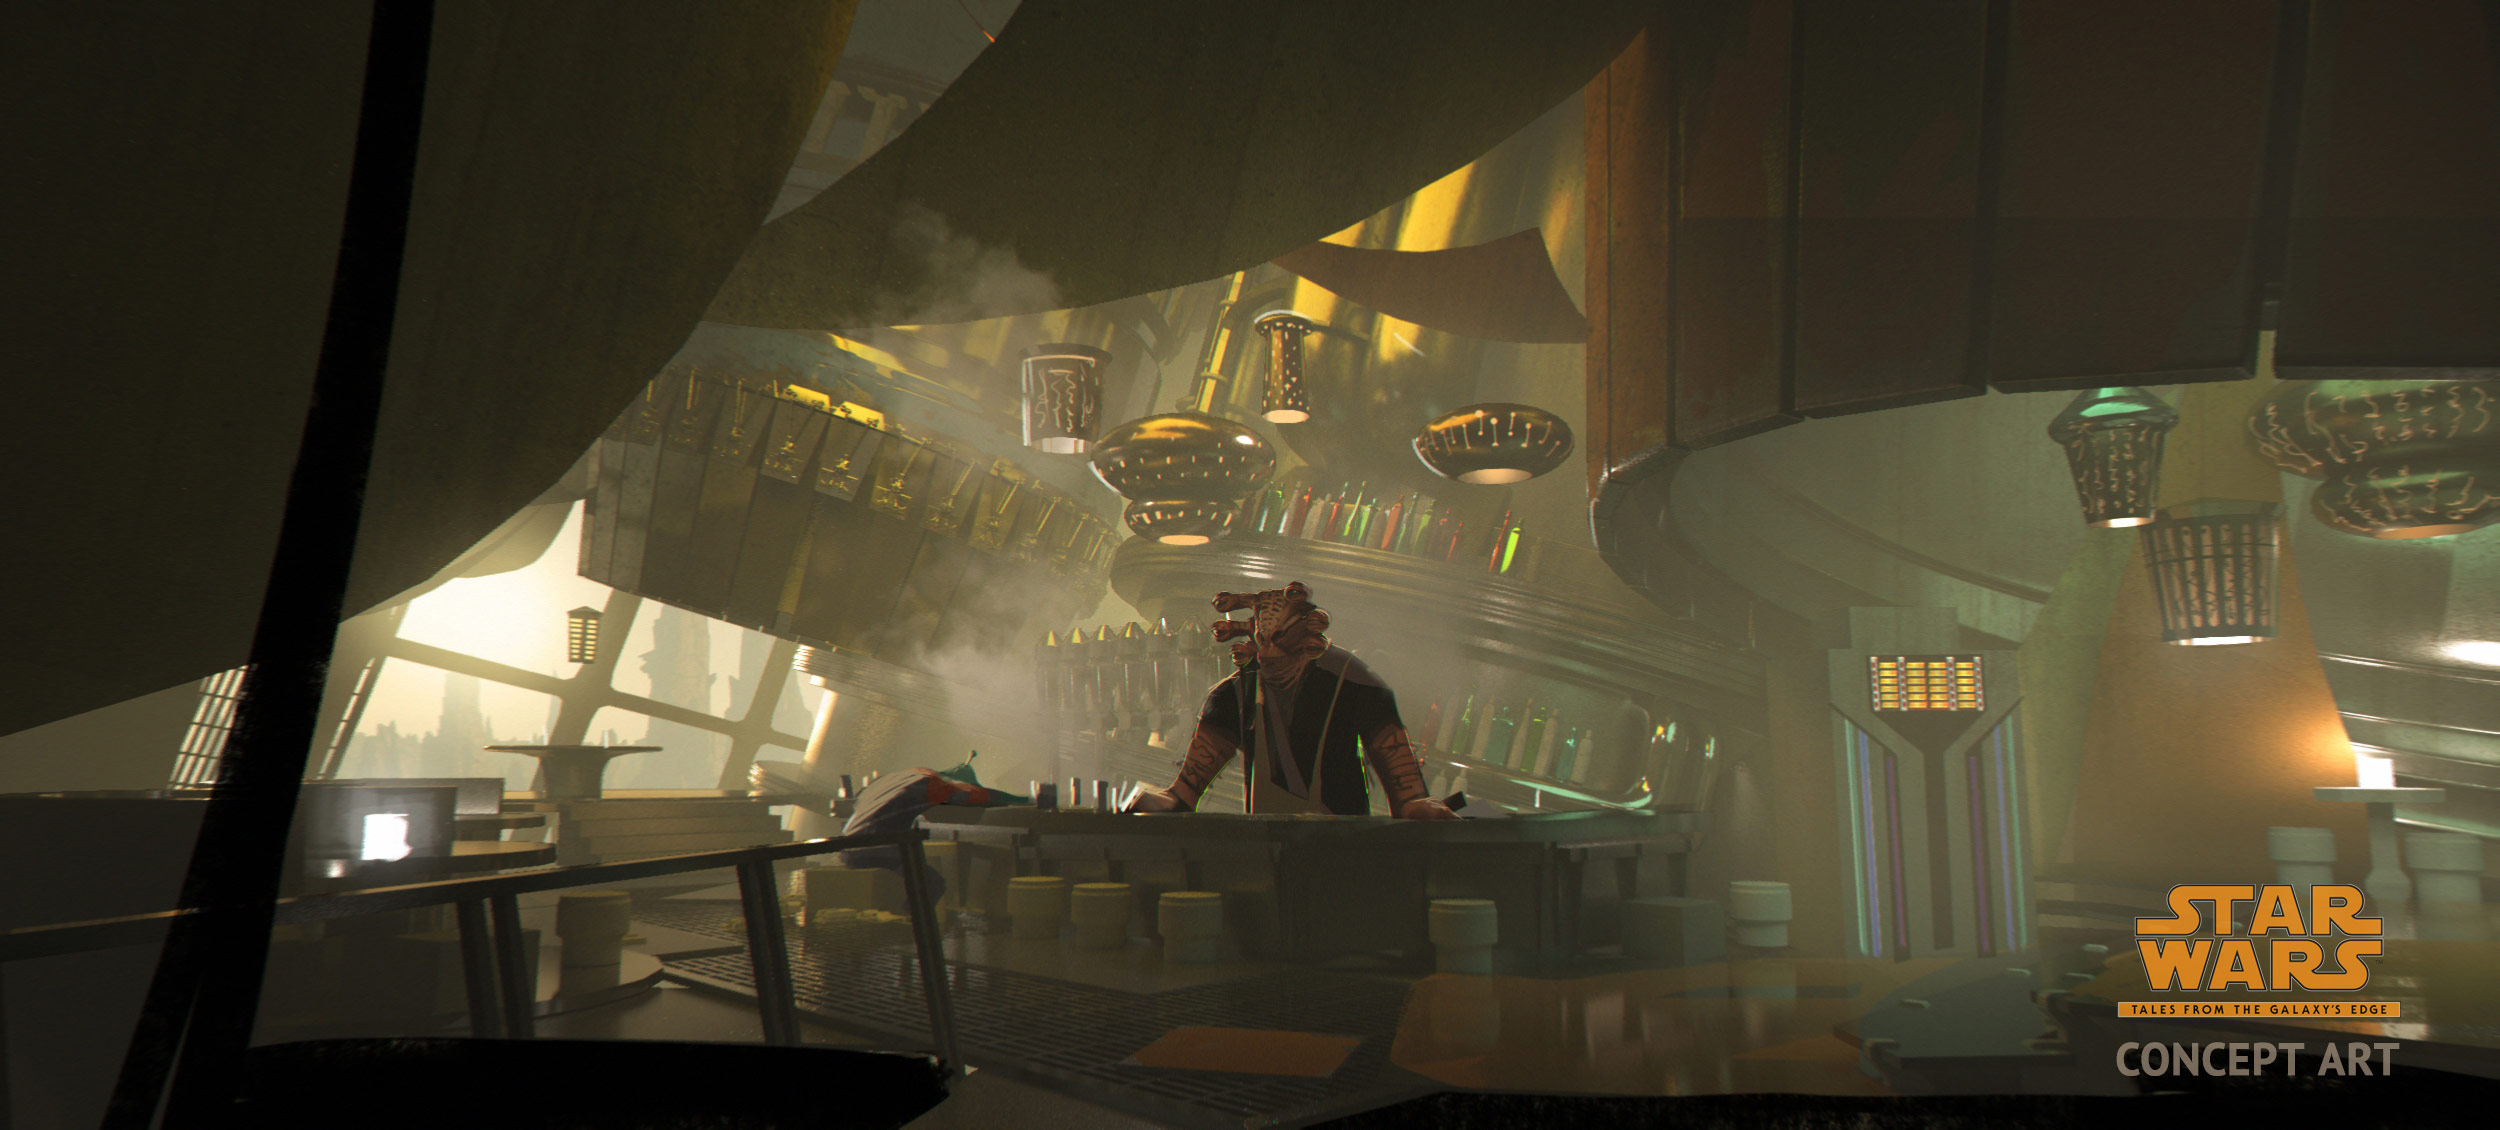 A concept art of Seezelslak's cantina: an Azumel alien standing behind the bar with a smoky/hazy environment, and what looks like a grimy but comfortable setting to sit down and hear a story.